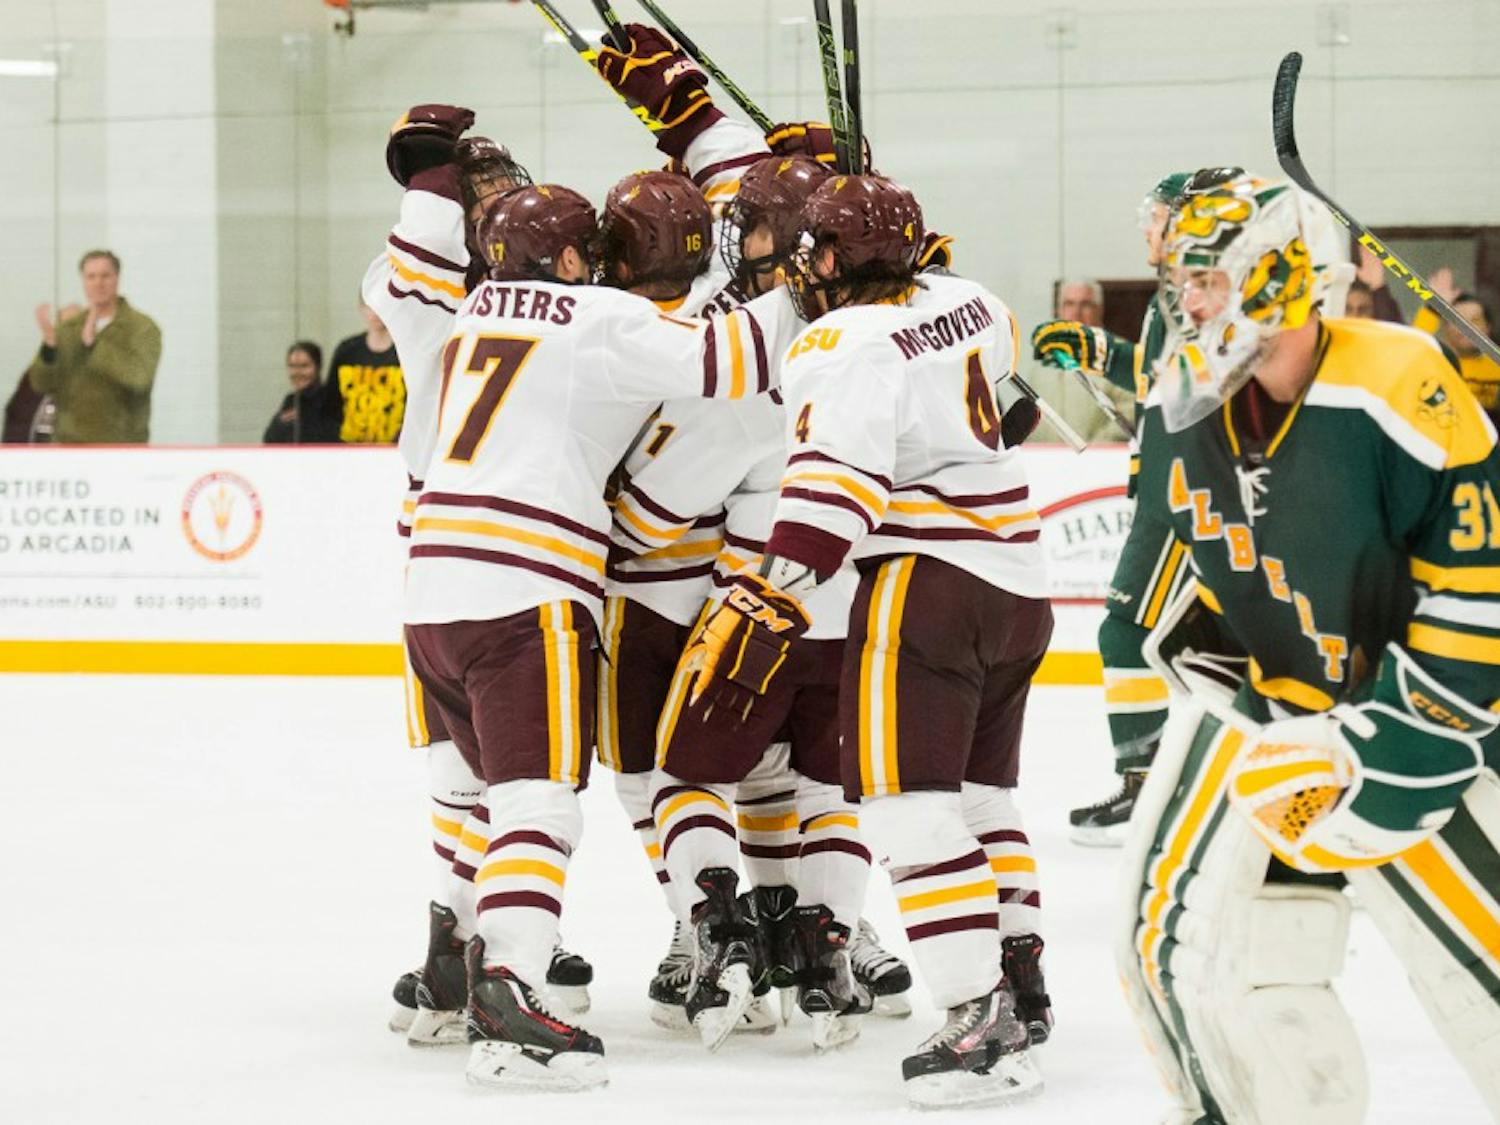 The ASU hockey team celebrates after a game-tying goal in overtime against the University of Alberta on Friday, Dec. 4, 2015, at Oceanside Ice Arena in Tempe. The Sun Devils defeated the Golden Bears 5-4 in a shootout.